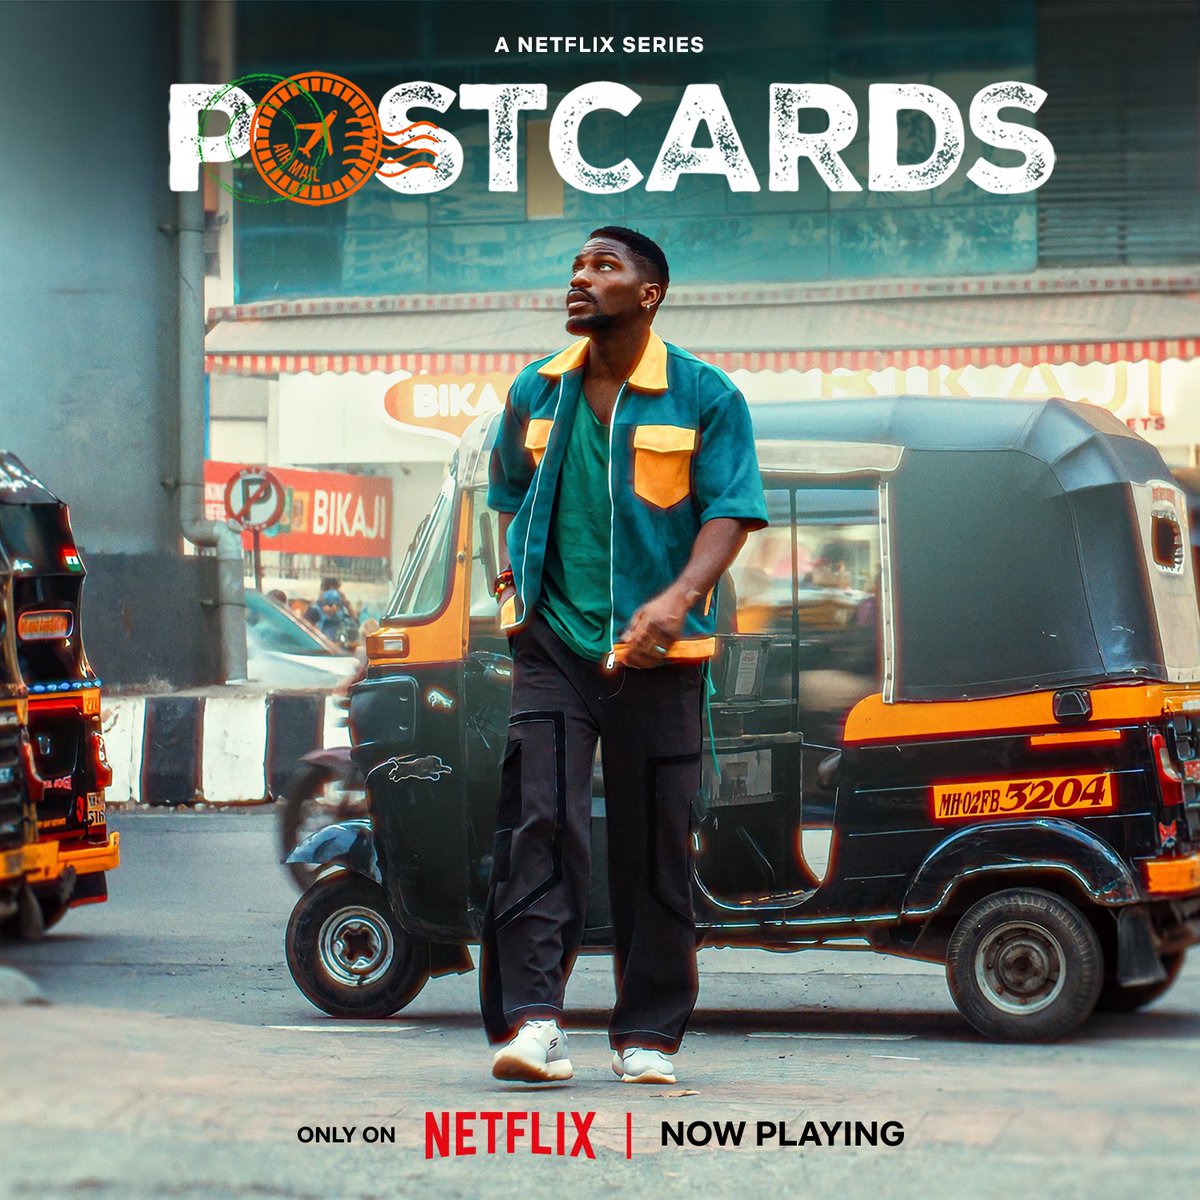 Streaming globally on @netflix Let’s enjoy this beautiful weekend! Postcards series!